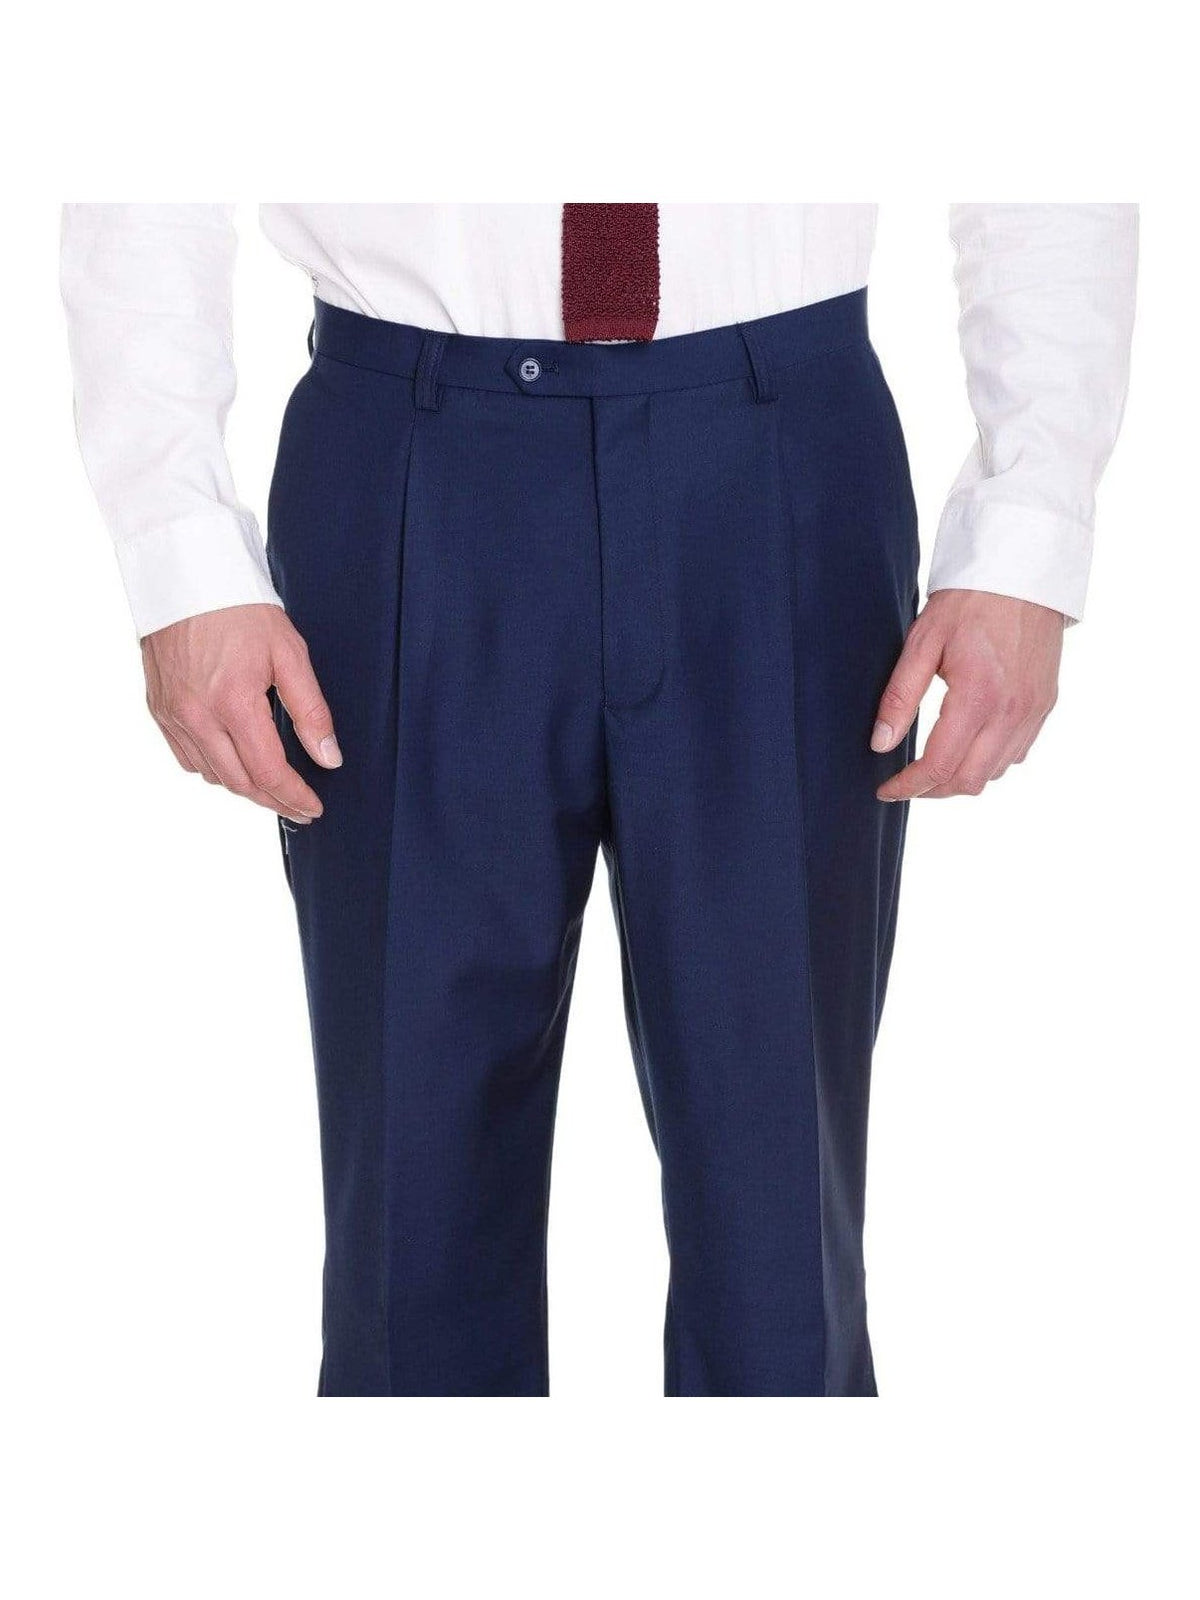 Raphael Classic Fit Solid Navy Blue Single Pleated Pants - The Suit Depot